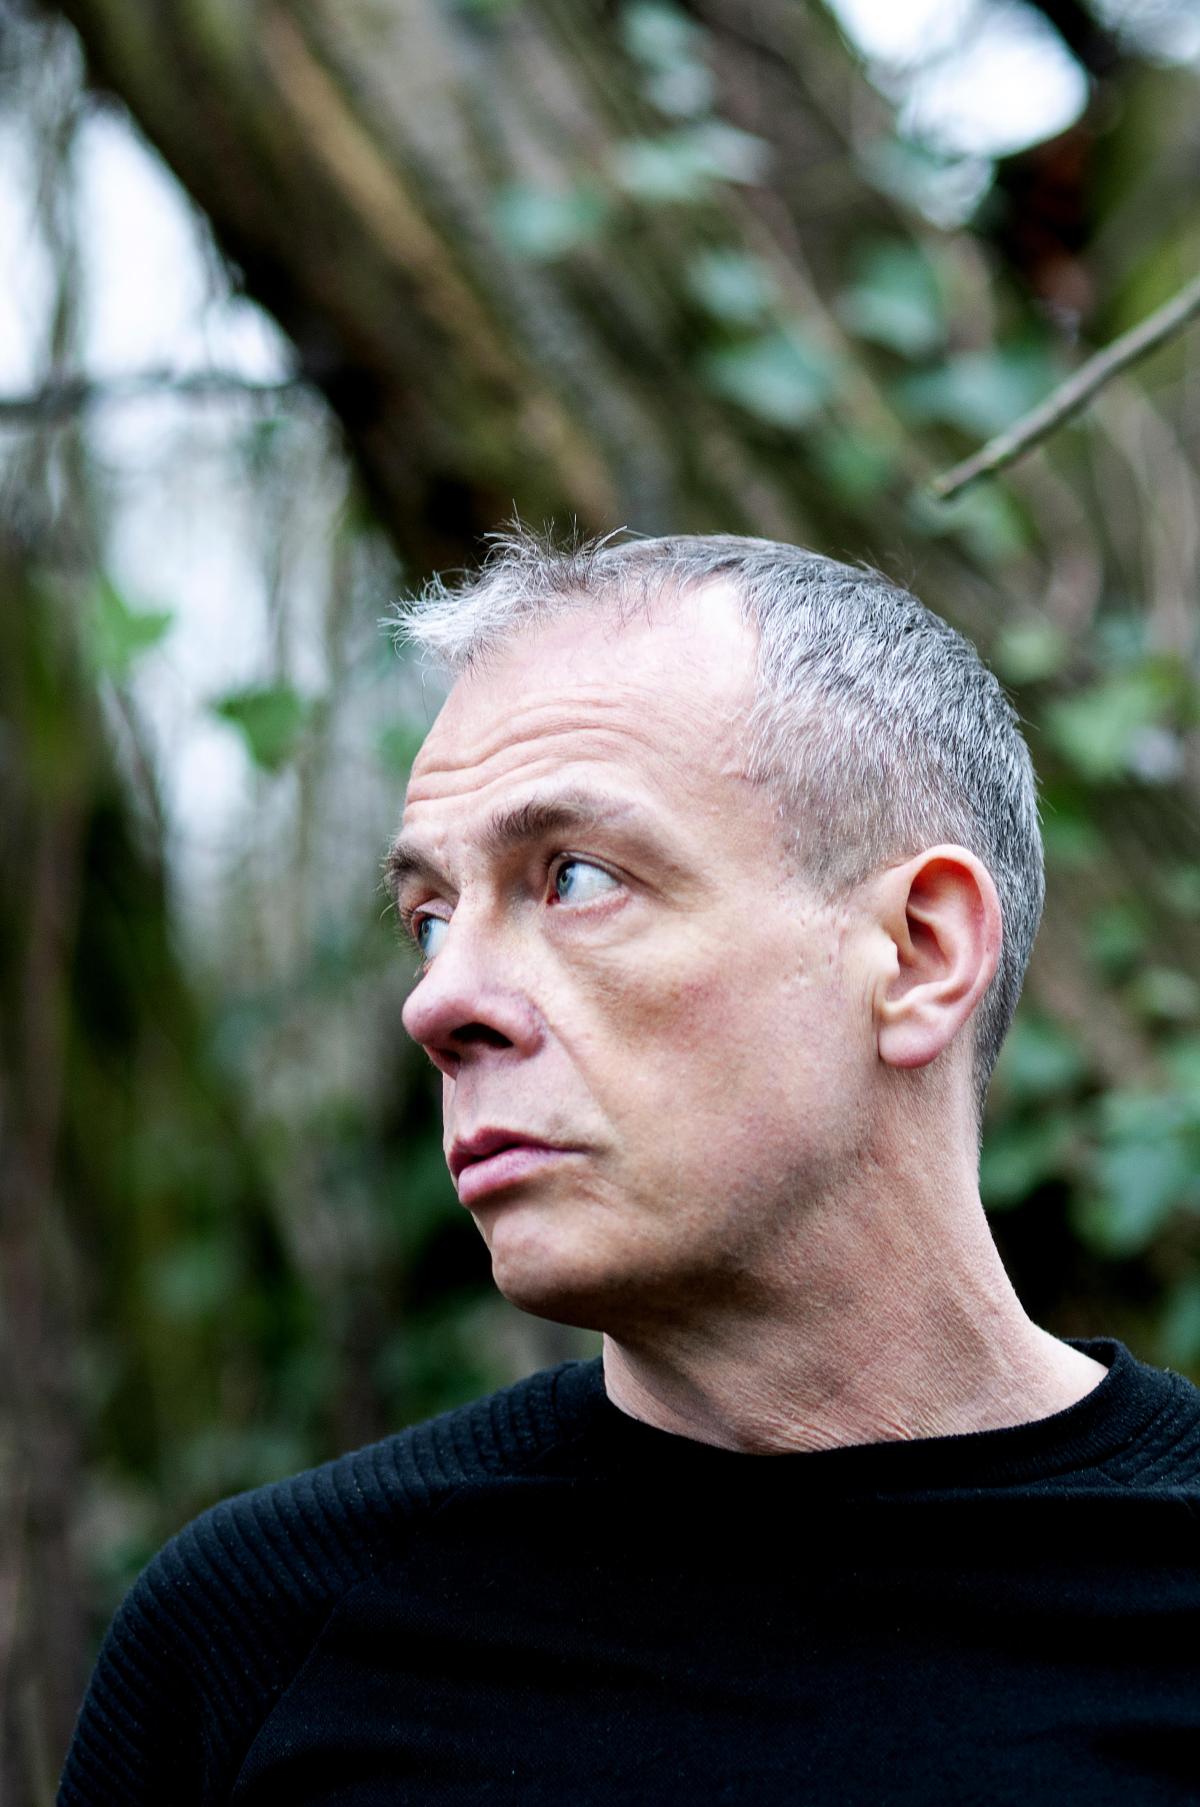 A white male which a closely shaved head looking to his right amongst a tree blurred background